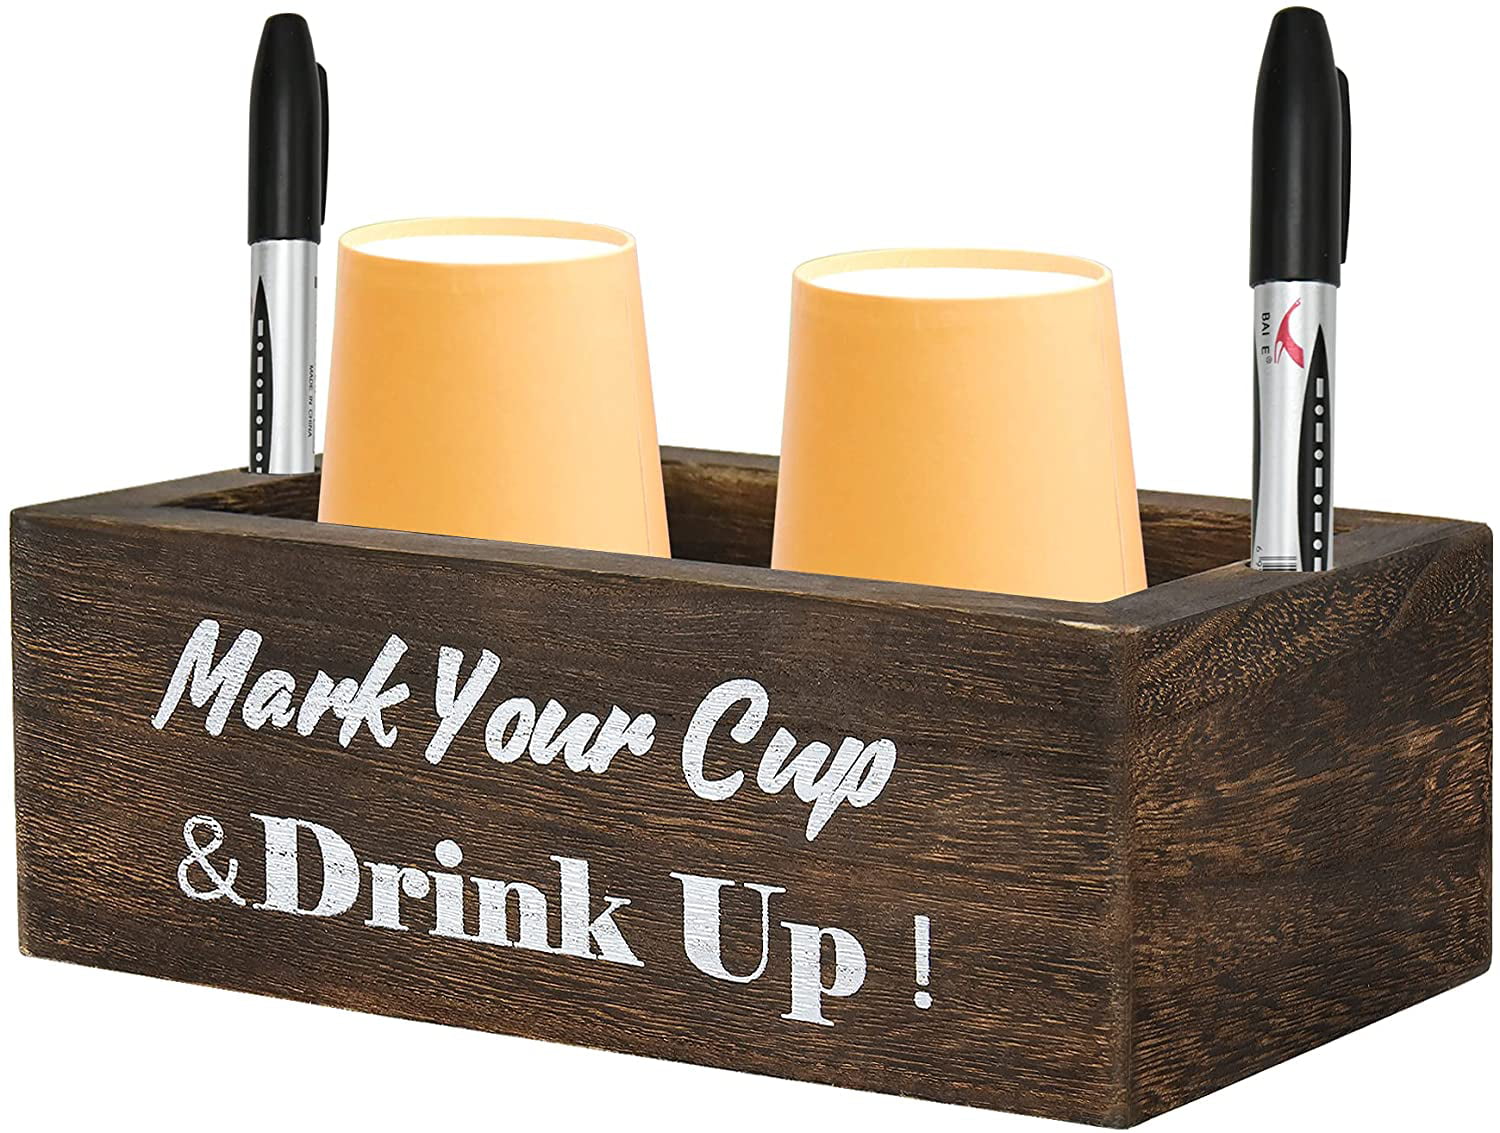 Farmhouse Drink Dispensers for Parties Holiday Decorative Solo Cup Holder with Marker Slot Wood Storage Box Mark Your Cup and Drink Up Cup Holder，Mouthwash Dispenser Cup Dispenser For Party 